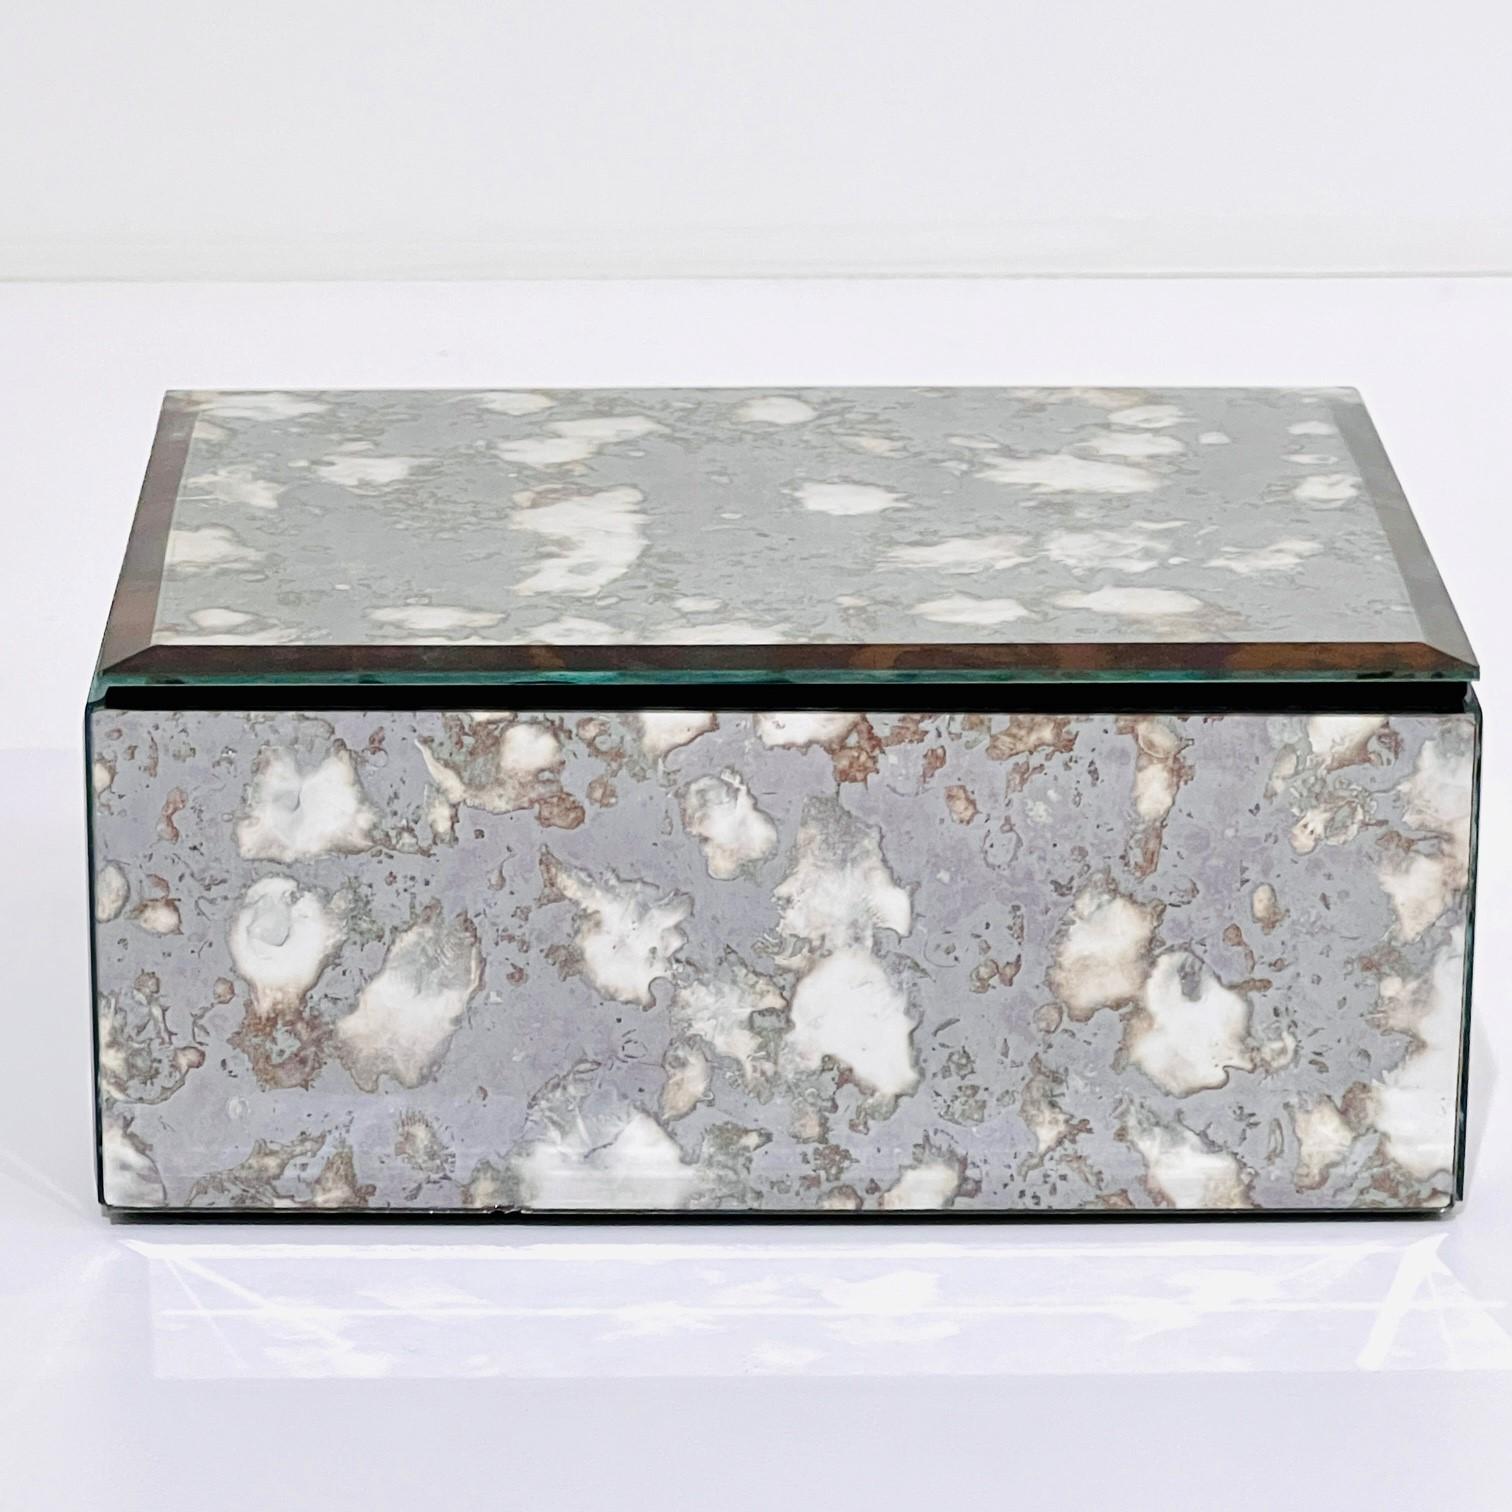 Vintage mirrored decorative box. The glass box captures the beautiful gradient movement of agate stone with antique spotted hues of grey and bronze. The box features beveled edges with a hinged lid and a black velvet felt interior and underside.